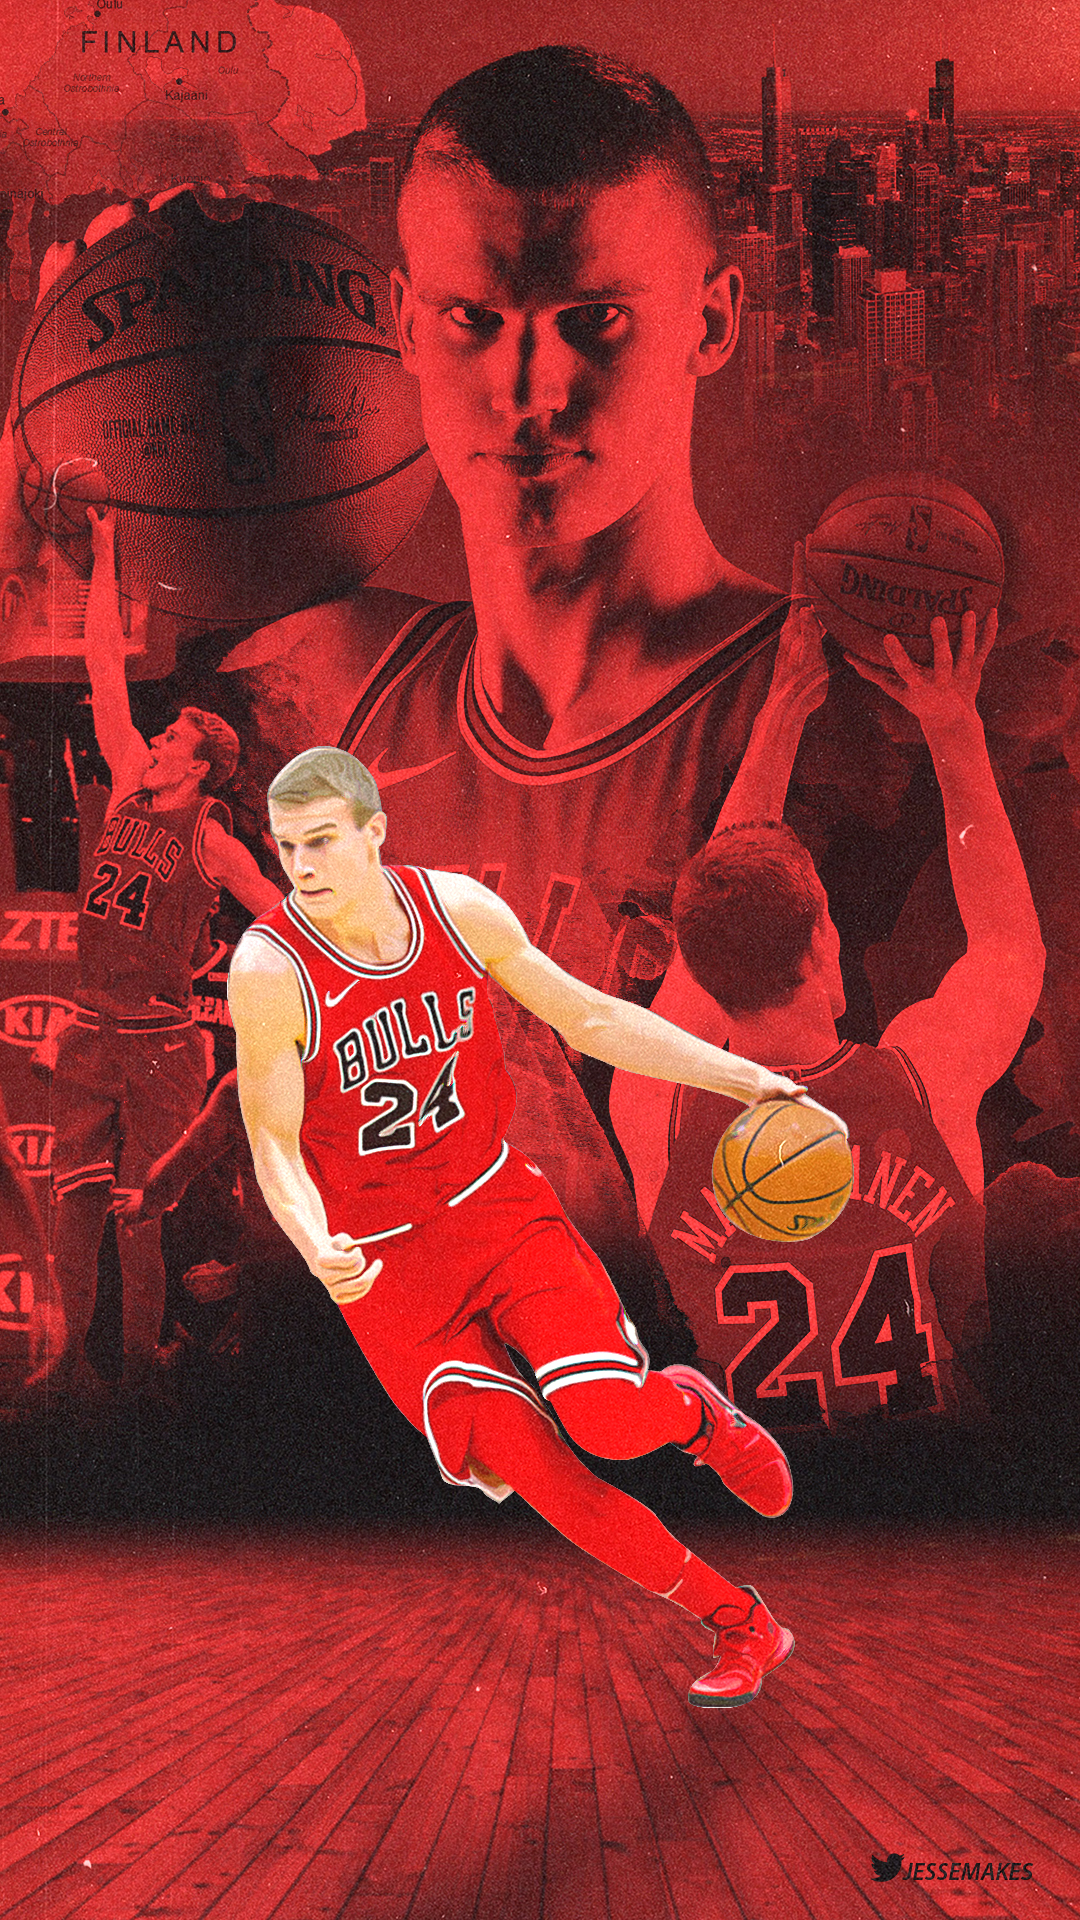 I Appreciate Lauri So Made A Wallpaper Thought D Share It